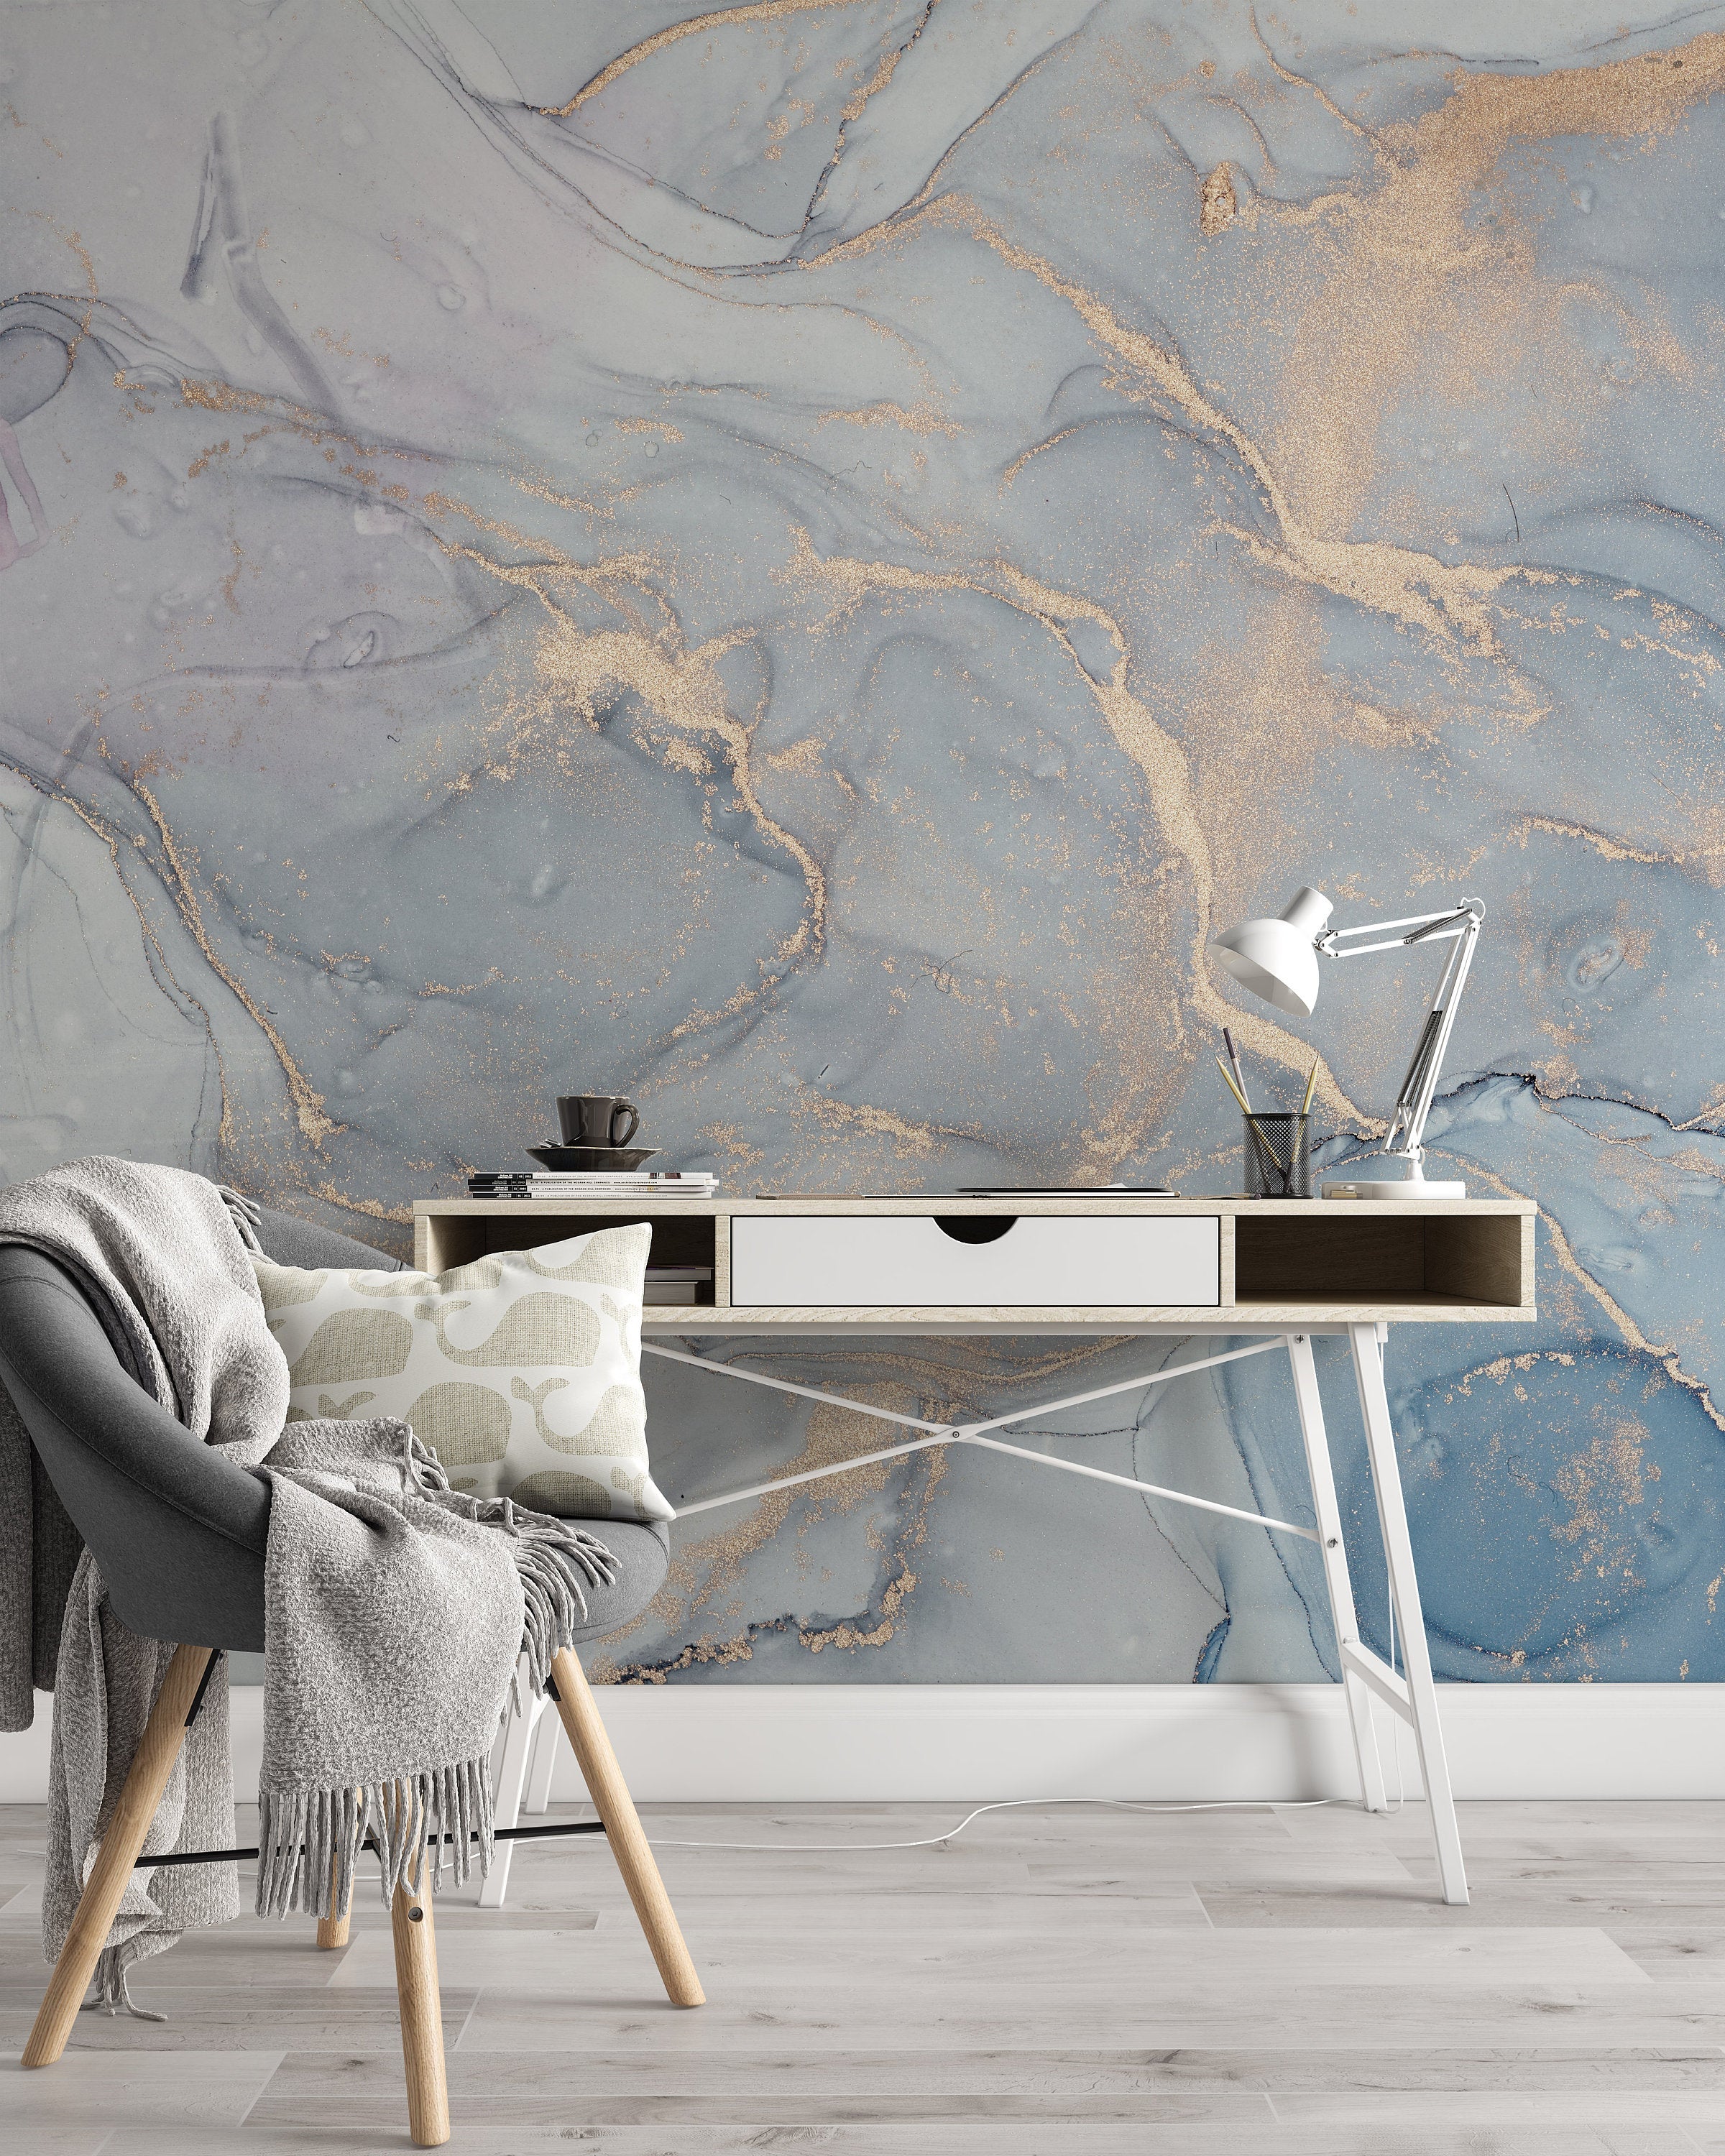 Marble Texture Abstract Blue Gold Acrylic Paints Wallpaper Cafe Restaurant Decoration Living Room Bedroom Mural Home Decor Wall Art